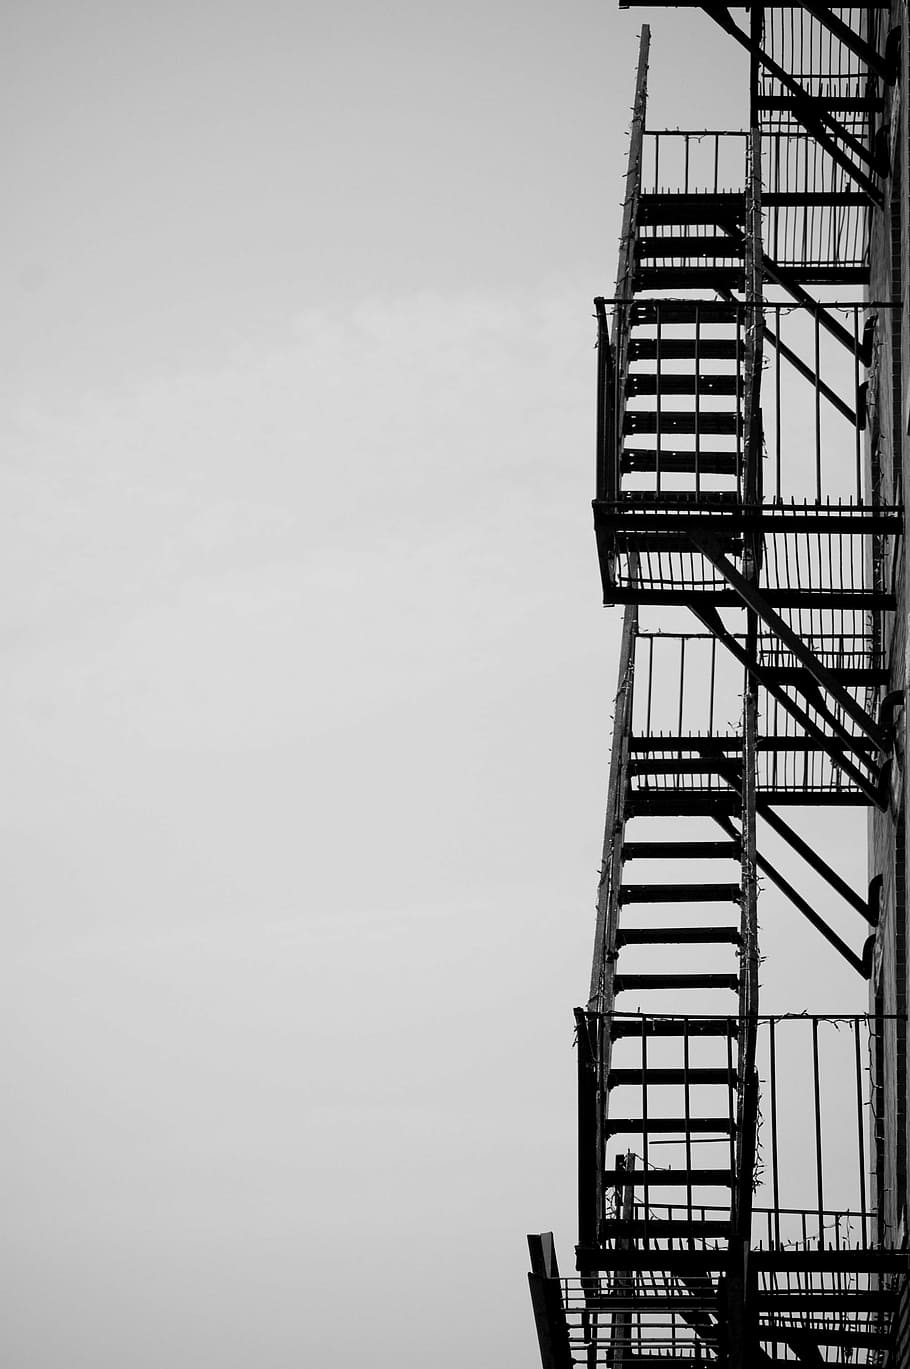 brown, metal racks, architectural, photography, black, metal, fire, exit, ladder, sky